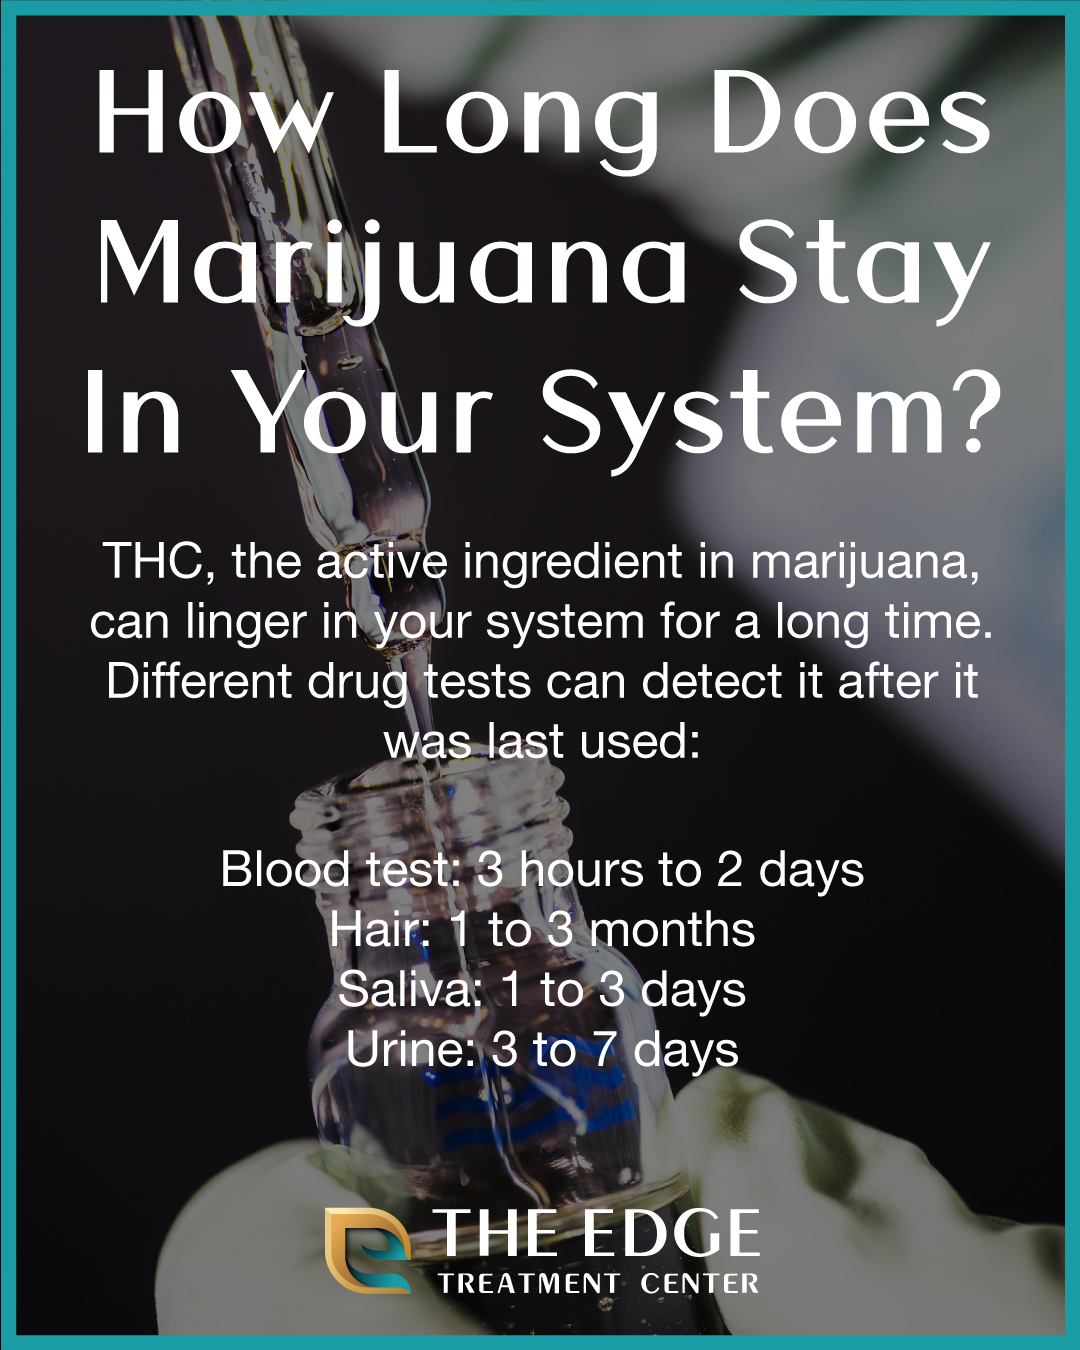 How Long Does Marijuana (Weed) Stay in Your System?